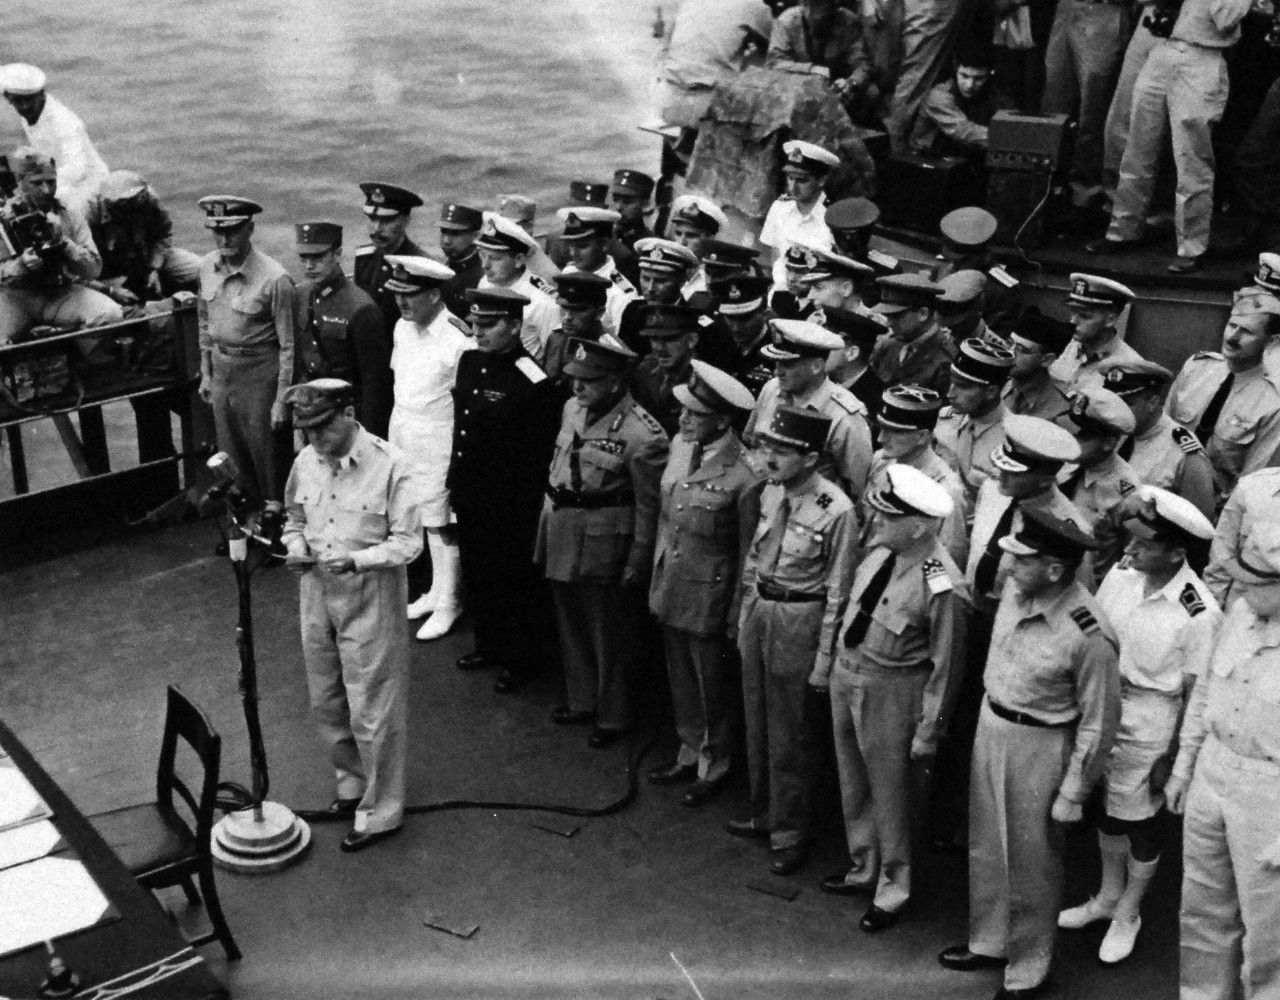 80-G-332694:  Formal Surrender of Japan, Tokyo Bay, September 2, 1945.  General of the Army Douglas MacArthur, Supreme Allied Commander, reading his speech to open the surrender ceremonies, on board USS Missouri (BB-63).  The representatives of the Allied Powers are behind him, including (from left to right): The U.S. representative, Fleet Admiral Chester W. Nimitz, USN;Representative of China, General Hsu Yung-chang; Admiral Sir Bruce Fraser, RN, United Kingdom; Lieutenant General Kuzma Derevyanko, Soviet Union; General Sir Thomas Blamey, Australia; Colonel Lawrence Moore Cosgrave, Canada; General Jacques LeClerc, France; Admiral Conrad E.L. Helfrich, The Netherlands and Air Vice Marshall Leonard M. Isitt, New Zealand.  This view is usually shown from the other side.   One can possibly see the photographers of those famous images. Photographed by Lieutenant C.A. Poots. Photographed from atop Missouri's 16-inch gun turret # 2.    Official U.S. Navy photograph, now in the collections of the National Archives.    (2015/11/17). Note, the original is a very small photograph.   